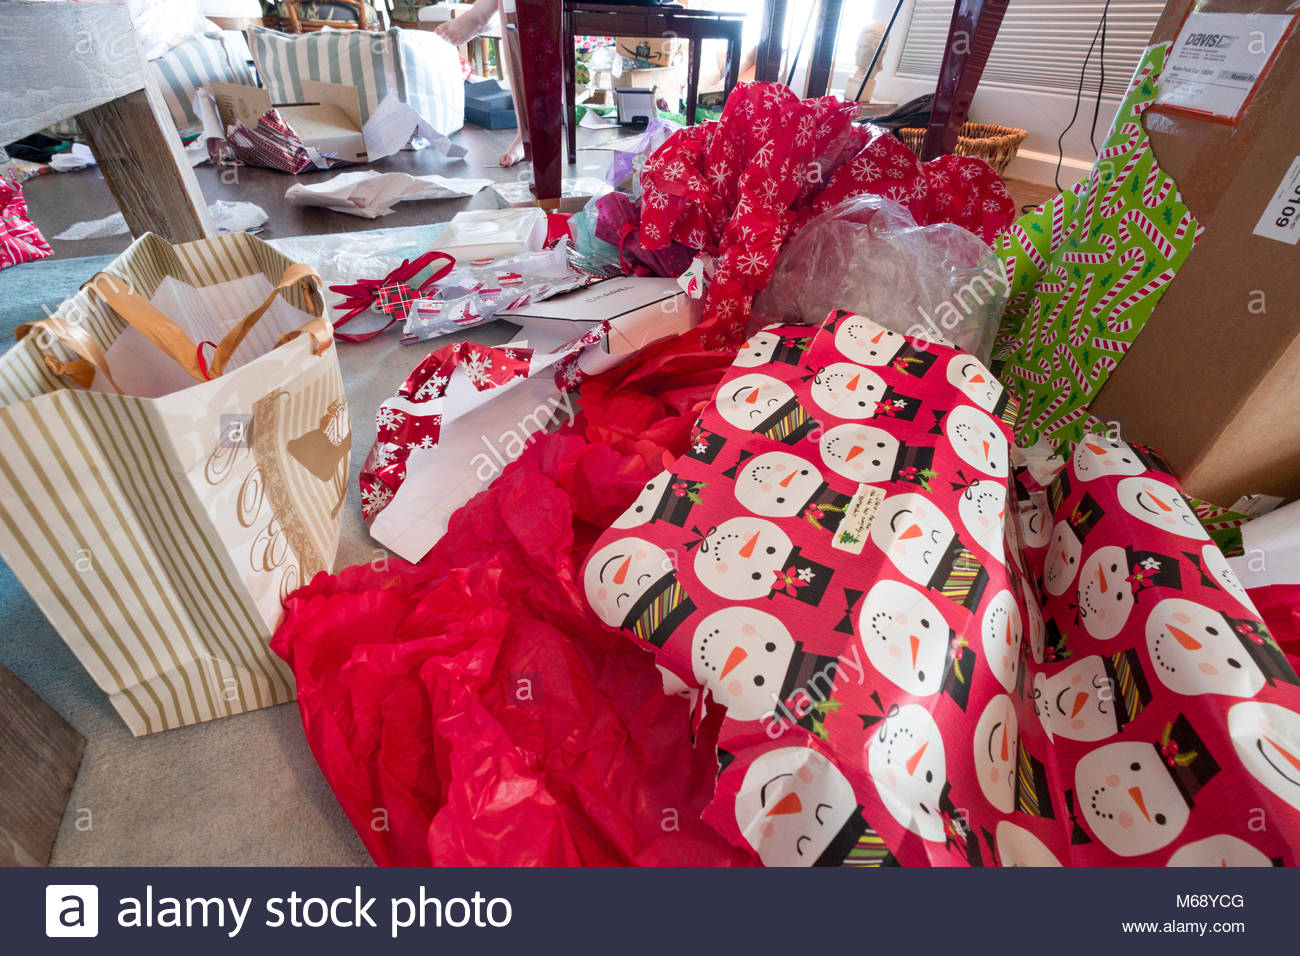 piles-of-discarded-wrapping-paper-and-ca